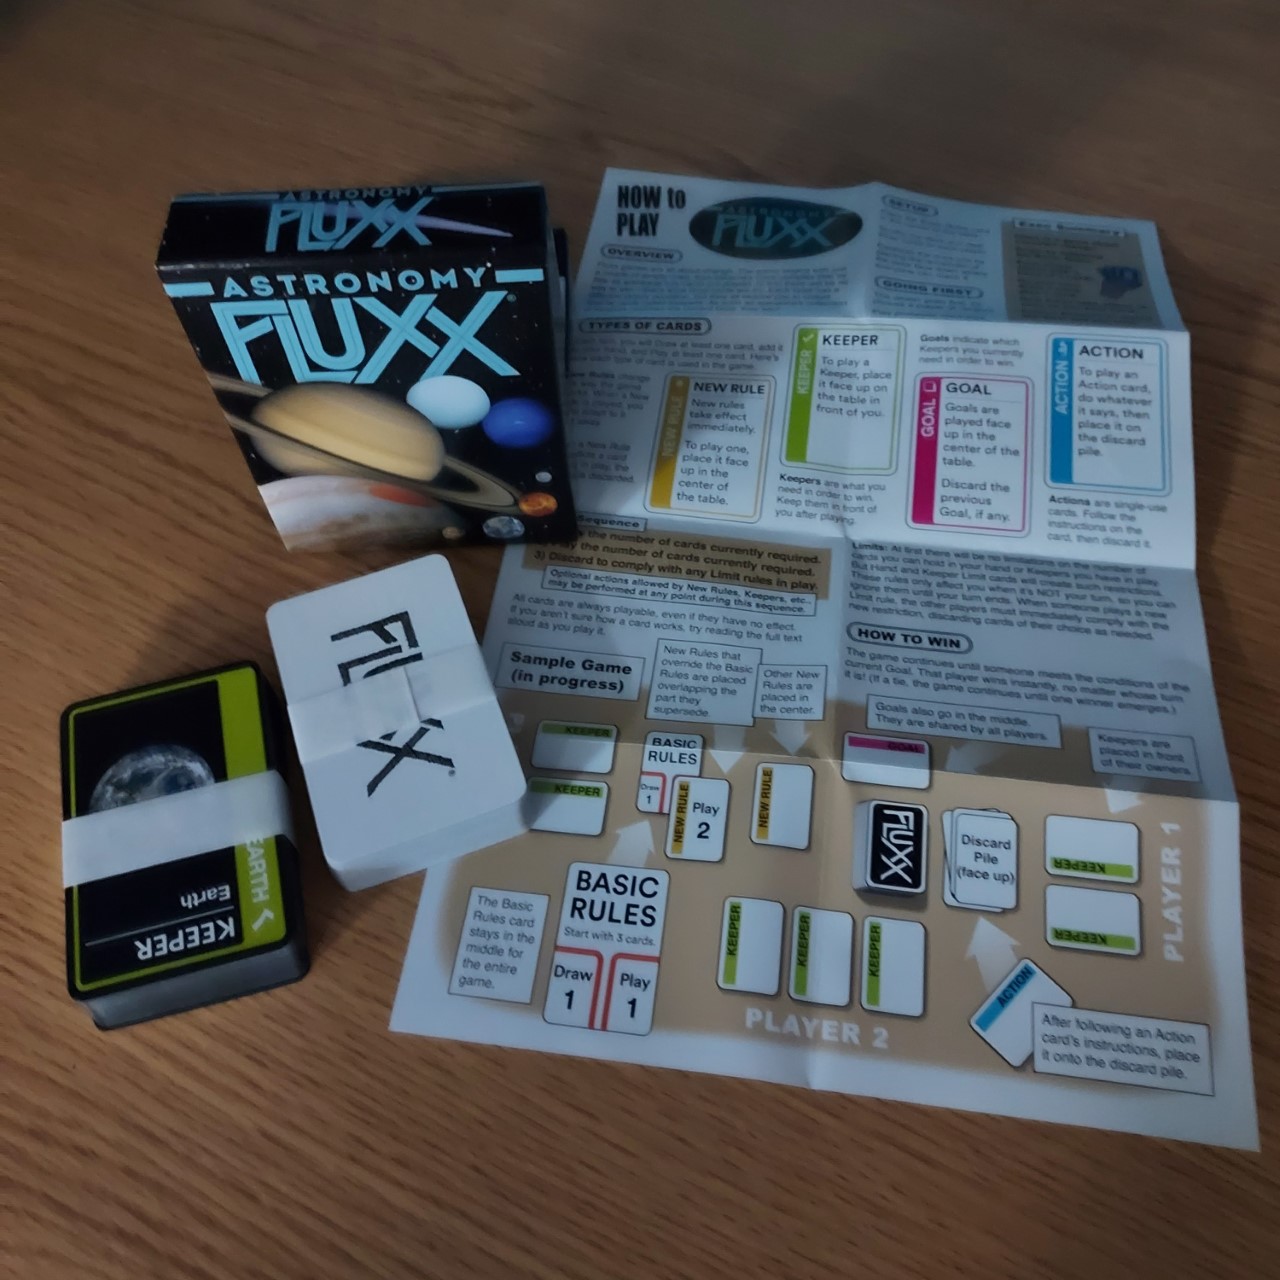 Image of the Astronomy Fluxx Card Game